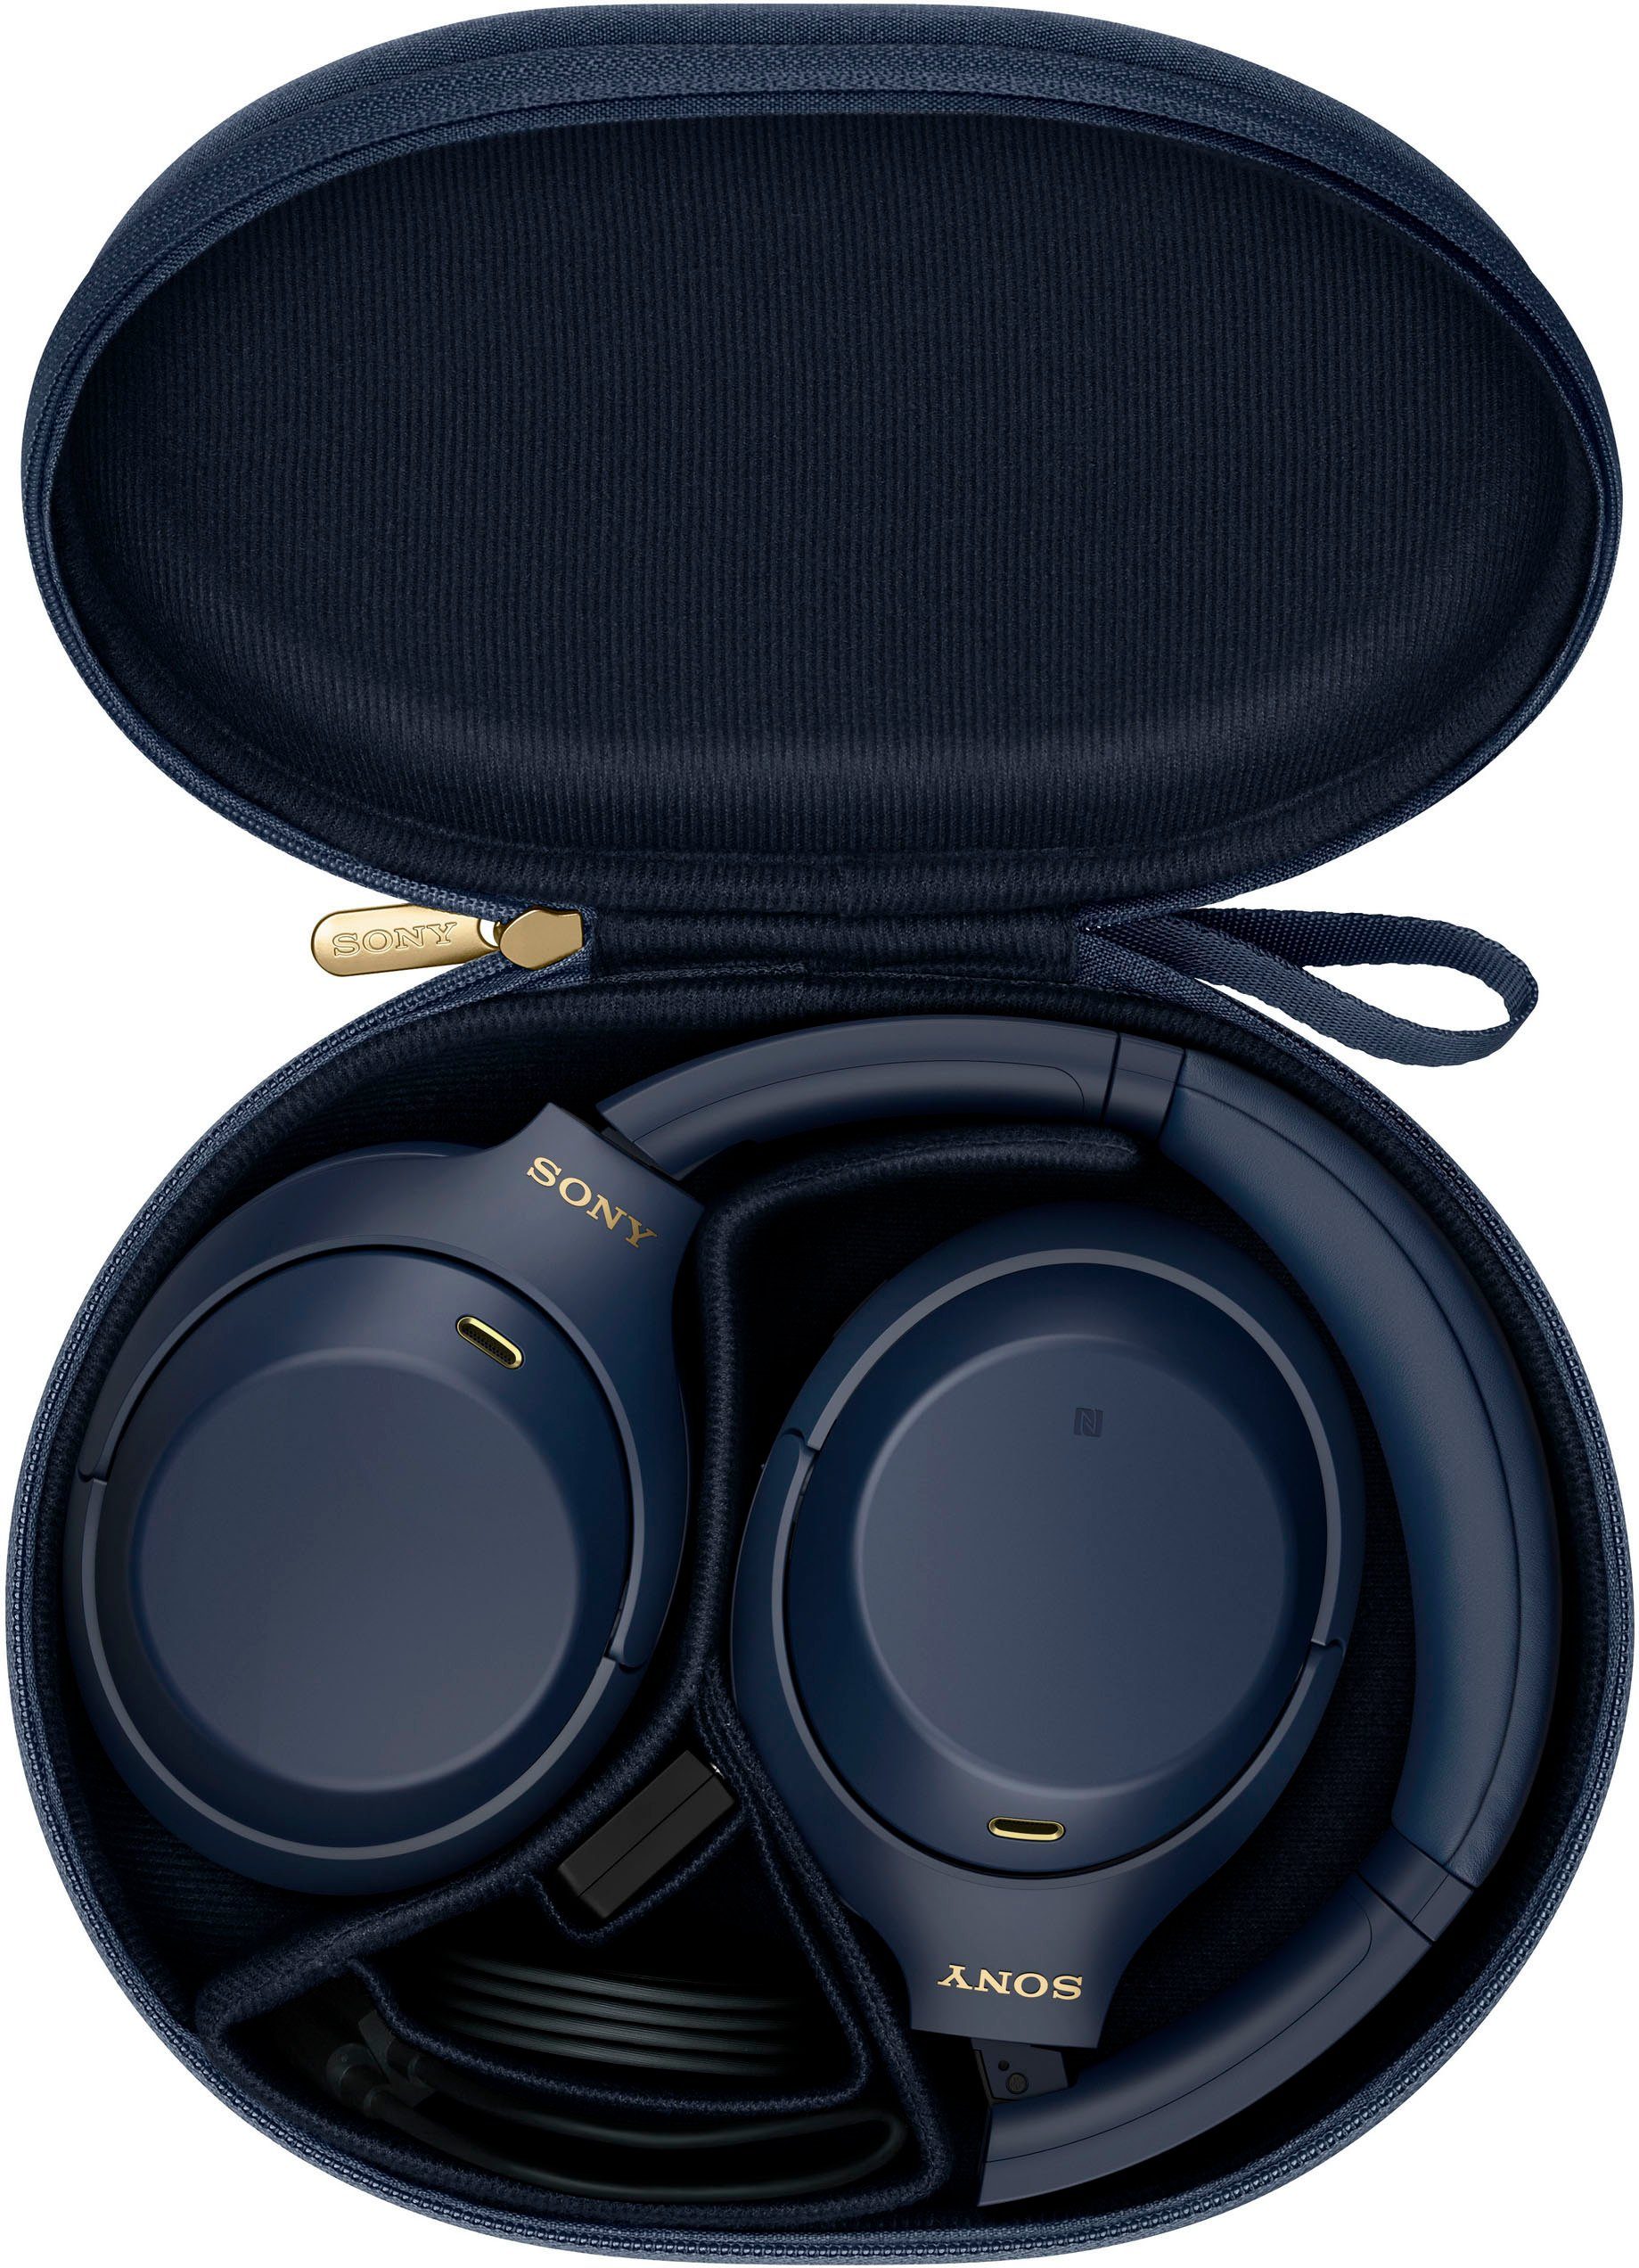 Sony WH-1000XM4 kabelloser Over-Ear-Kopfhörer (Noise-Cancelling, NFC, via Sensor, One-Touch Bluetooth, blau NFC, Schnellladefunktion) Verbindung Touch